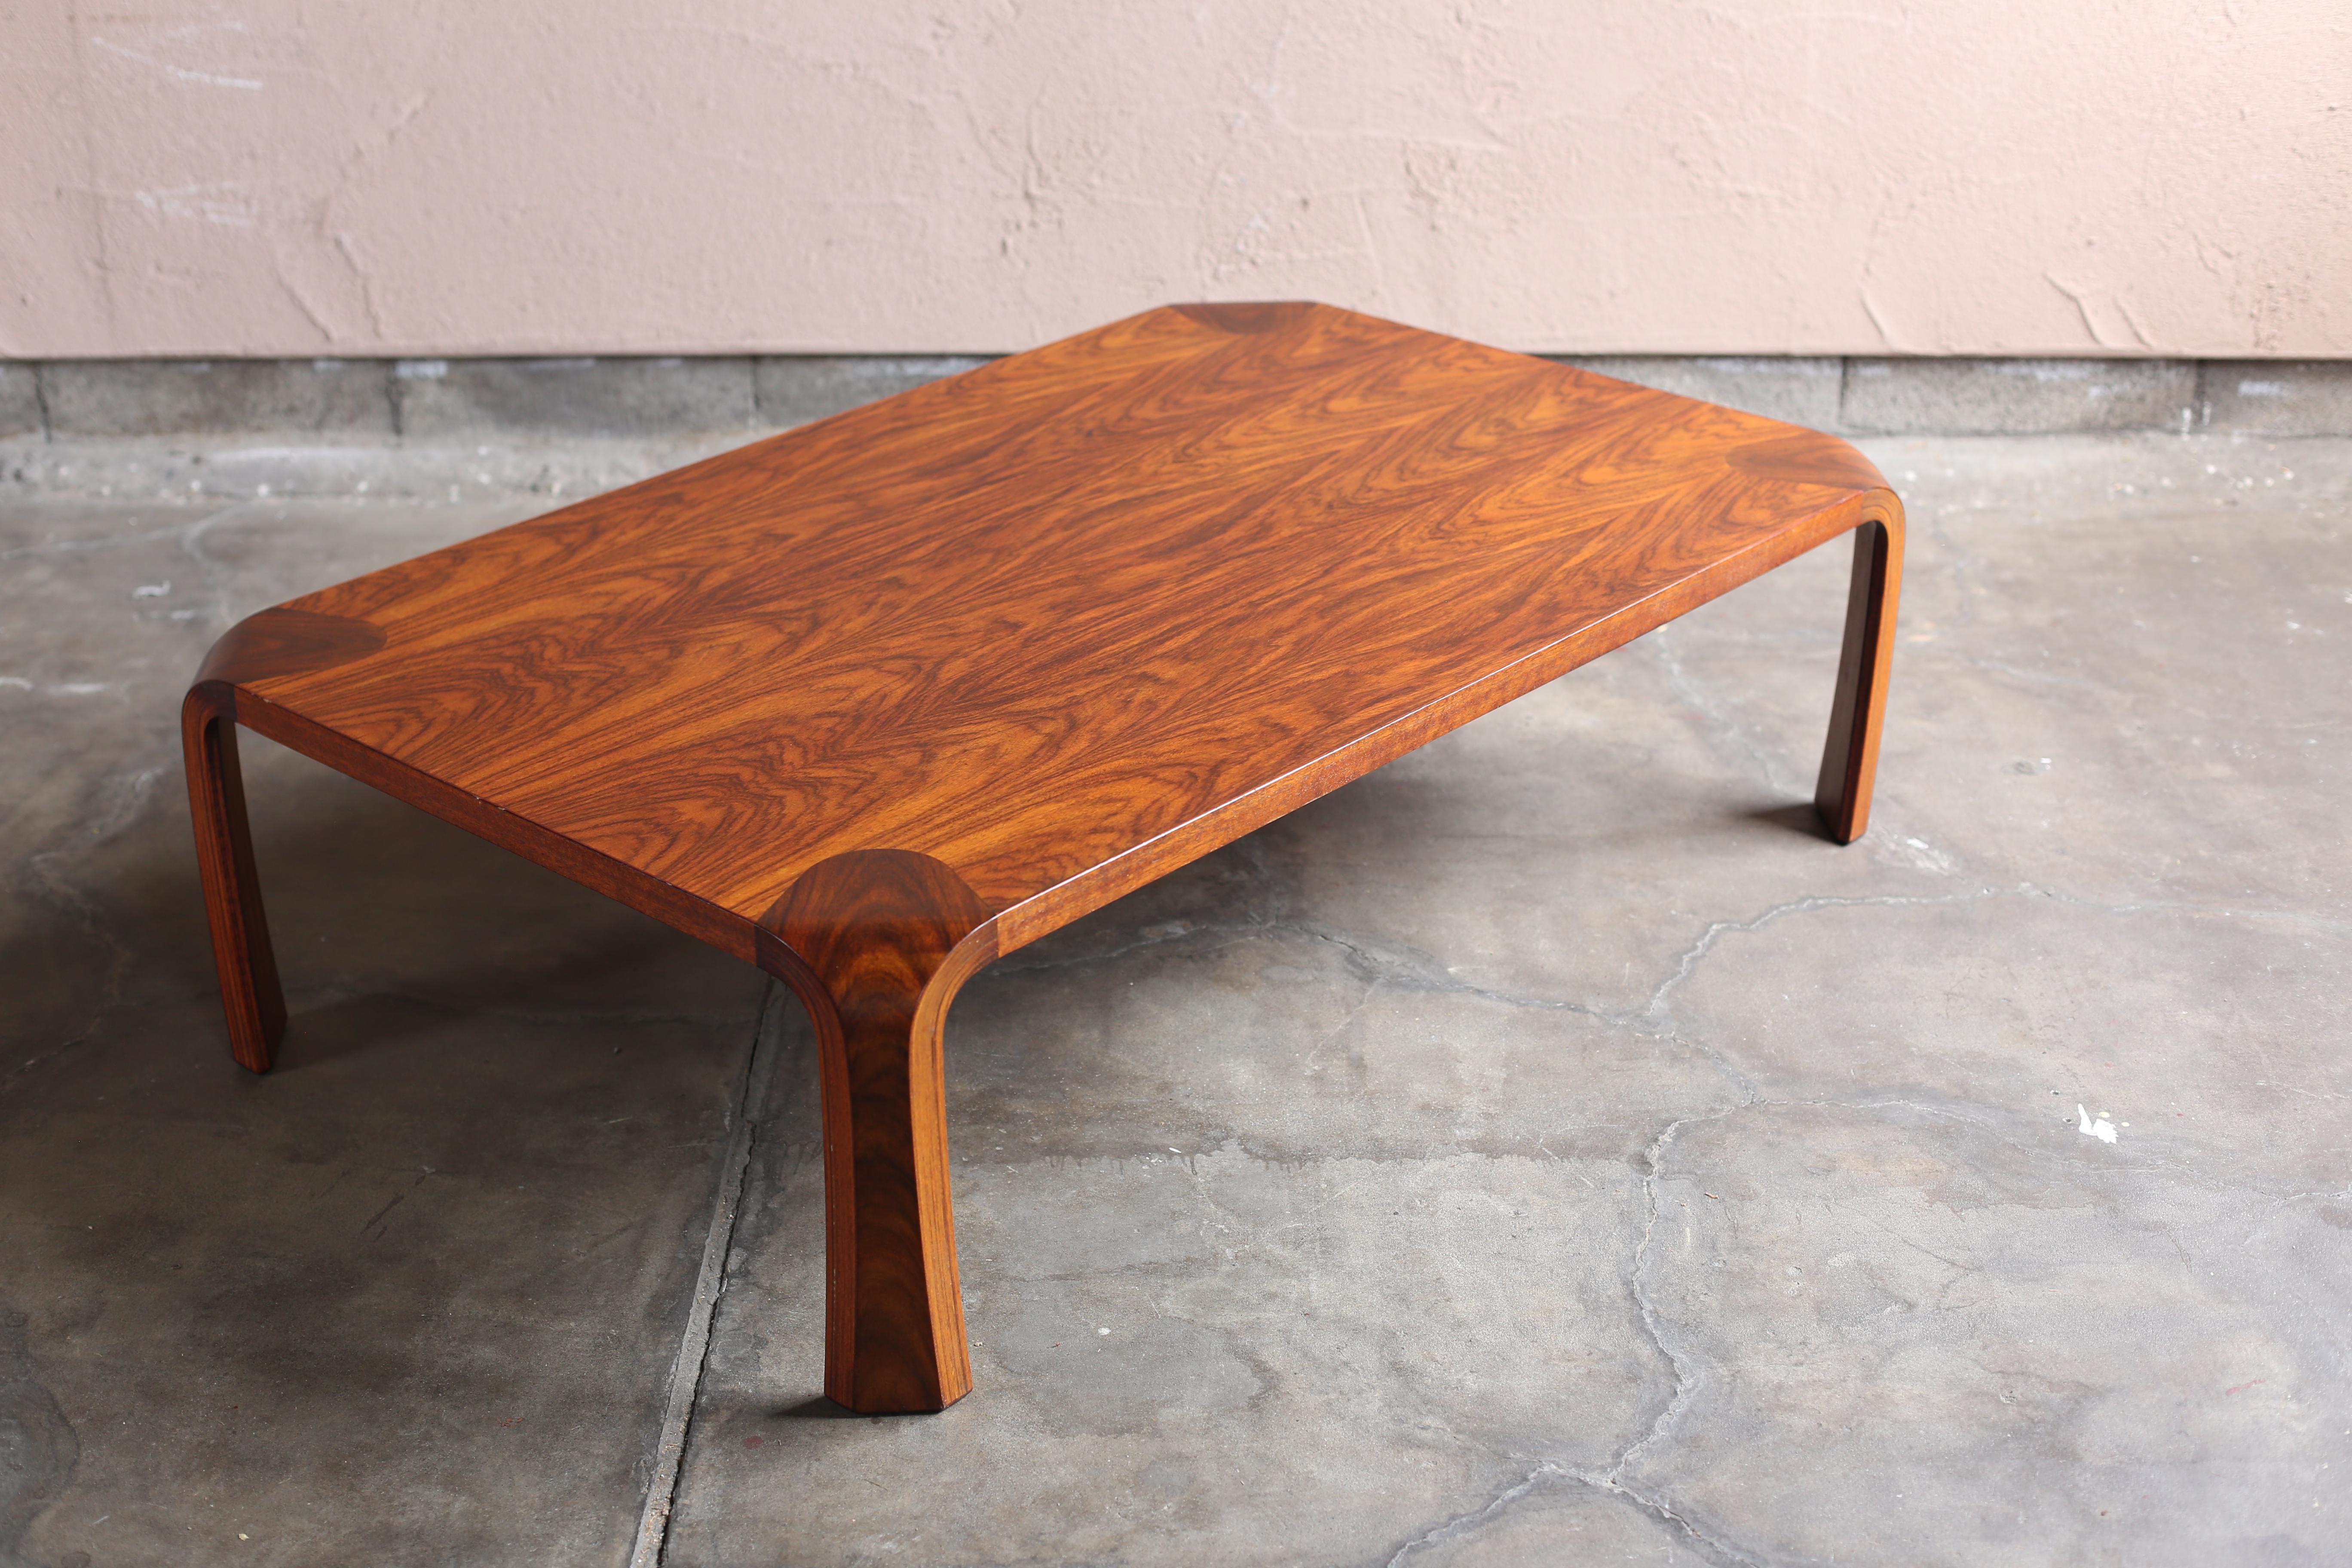 This table was designed by Saburo Inui in 1959 and manufactured by the Japanese manufacturer 